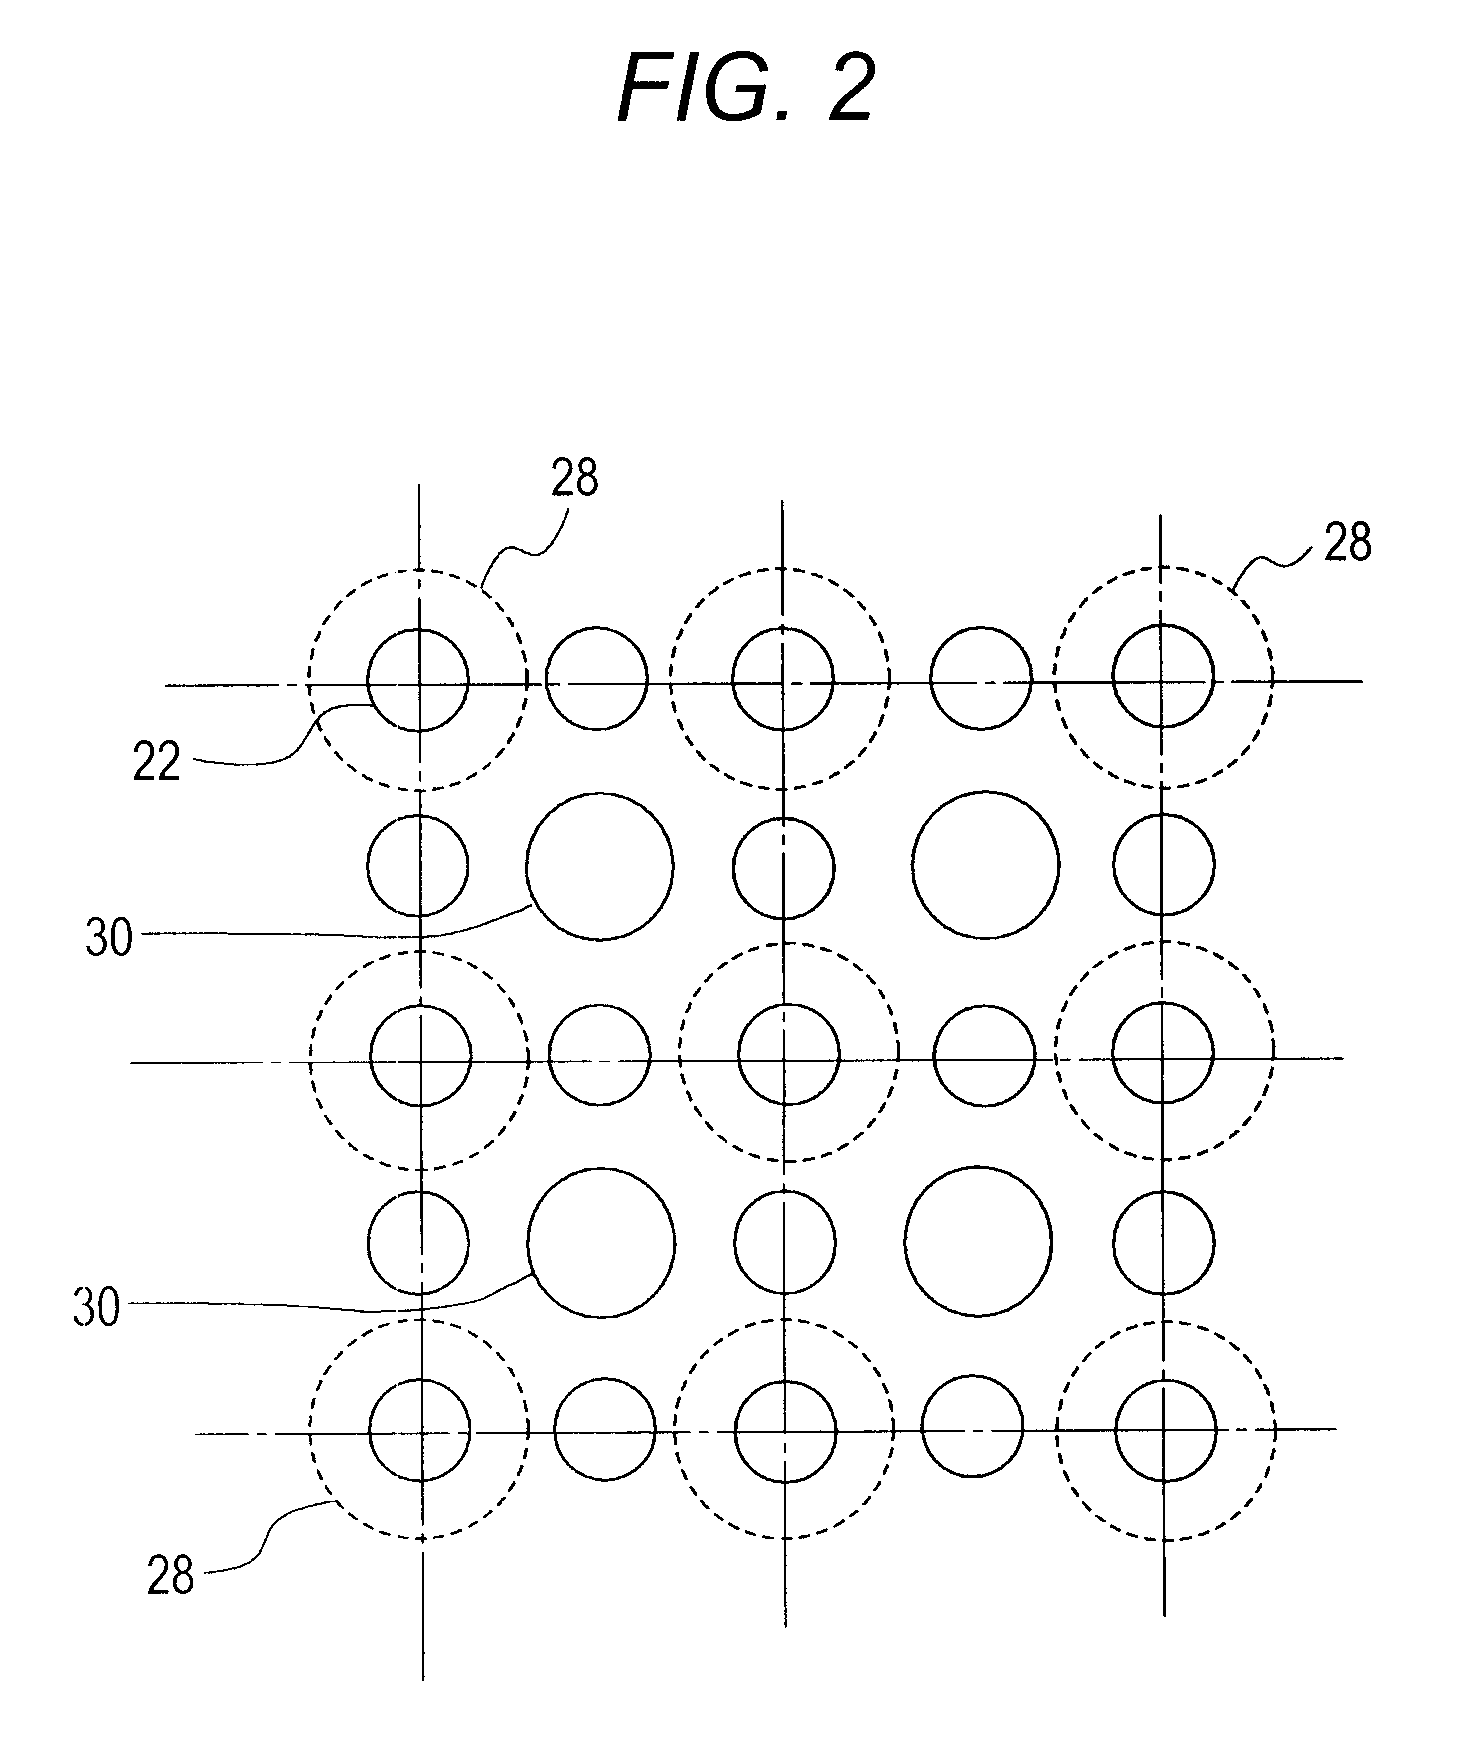 Wiring board, semiconductor device and semiconductor element